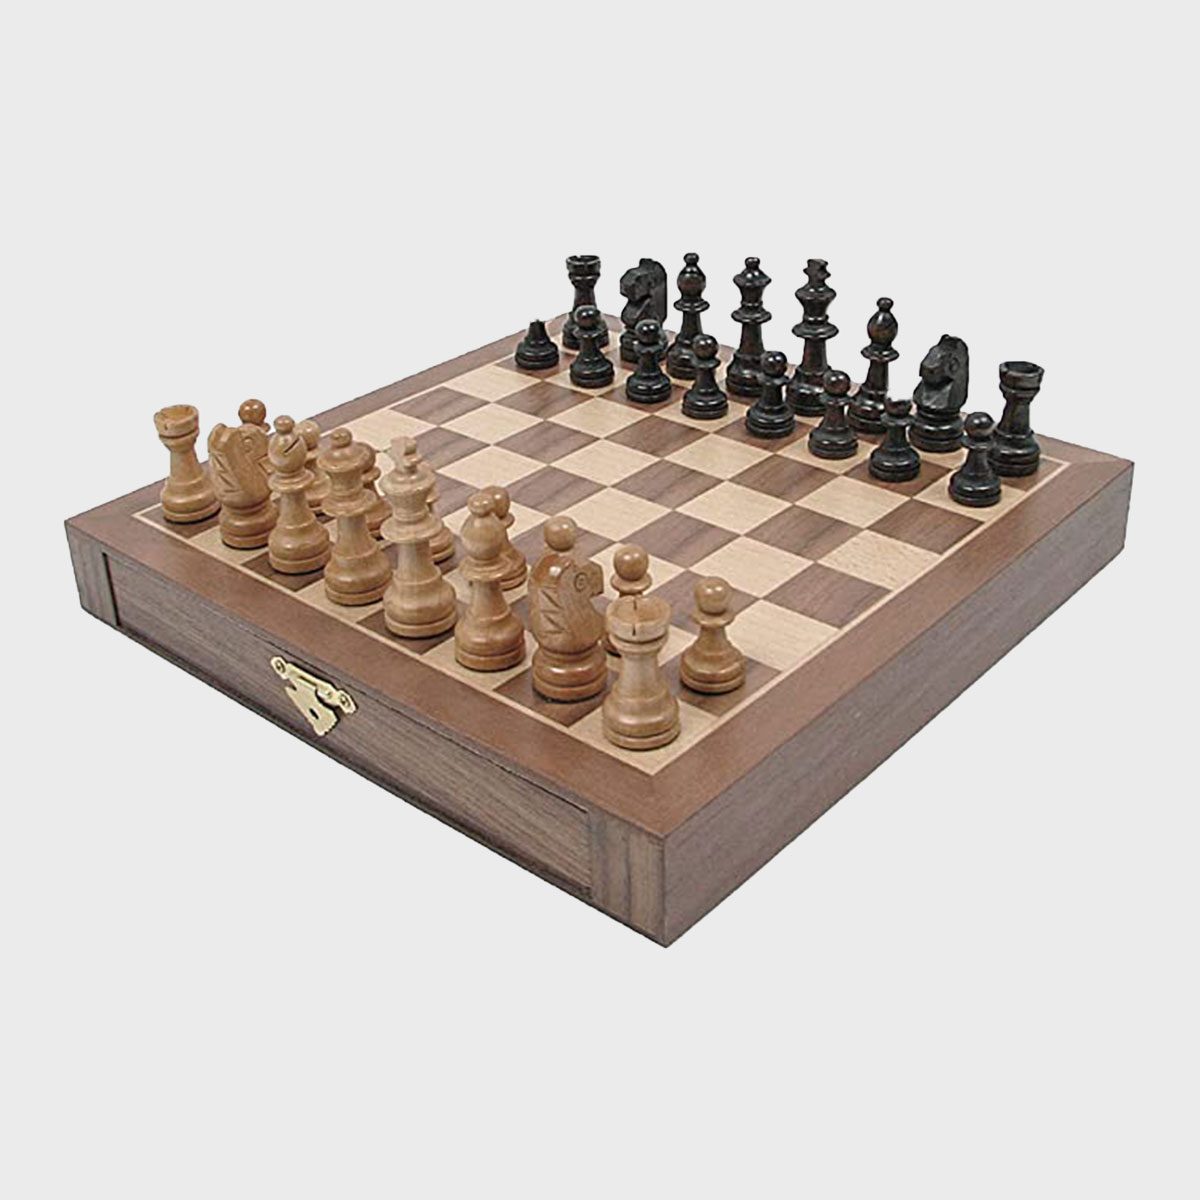 Chess Online: Board Games 3D - Offline Classic Chess 3D - Chess Maker :  Play With Friends - Multiplayer Chess Game - Online Multiplayer Chess -  Offline Multiplayer Chess - Real Chess - Microsoft Apps